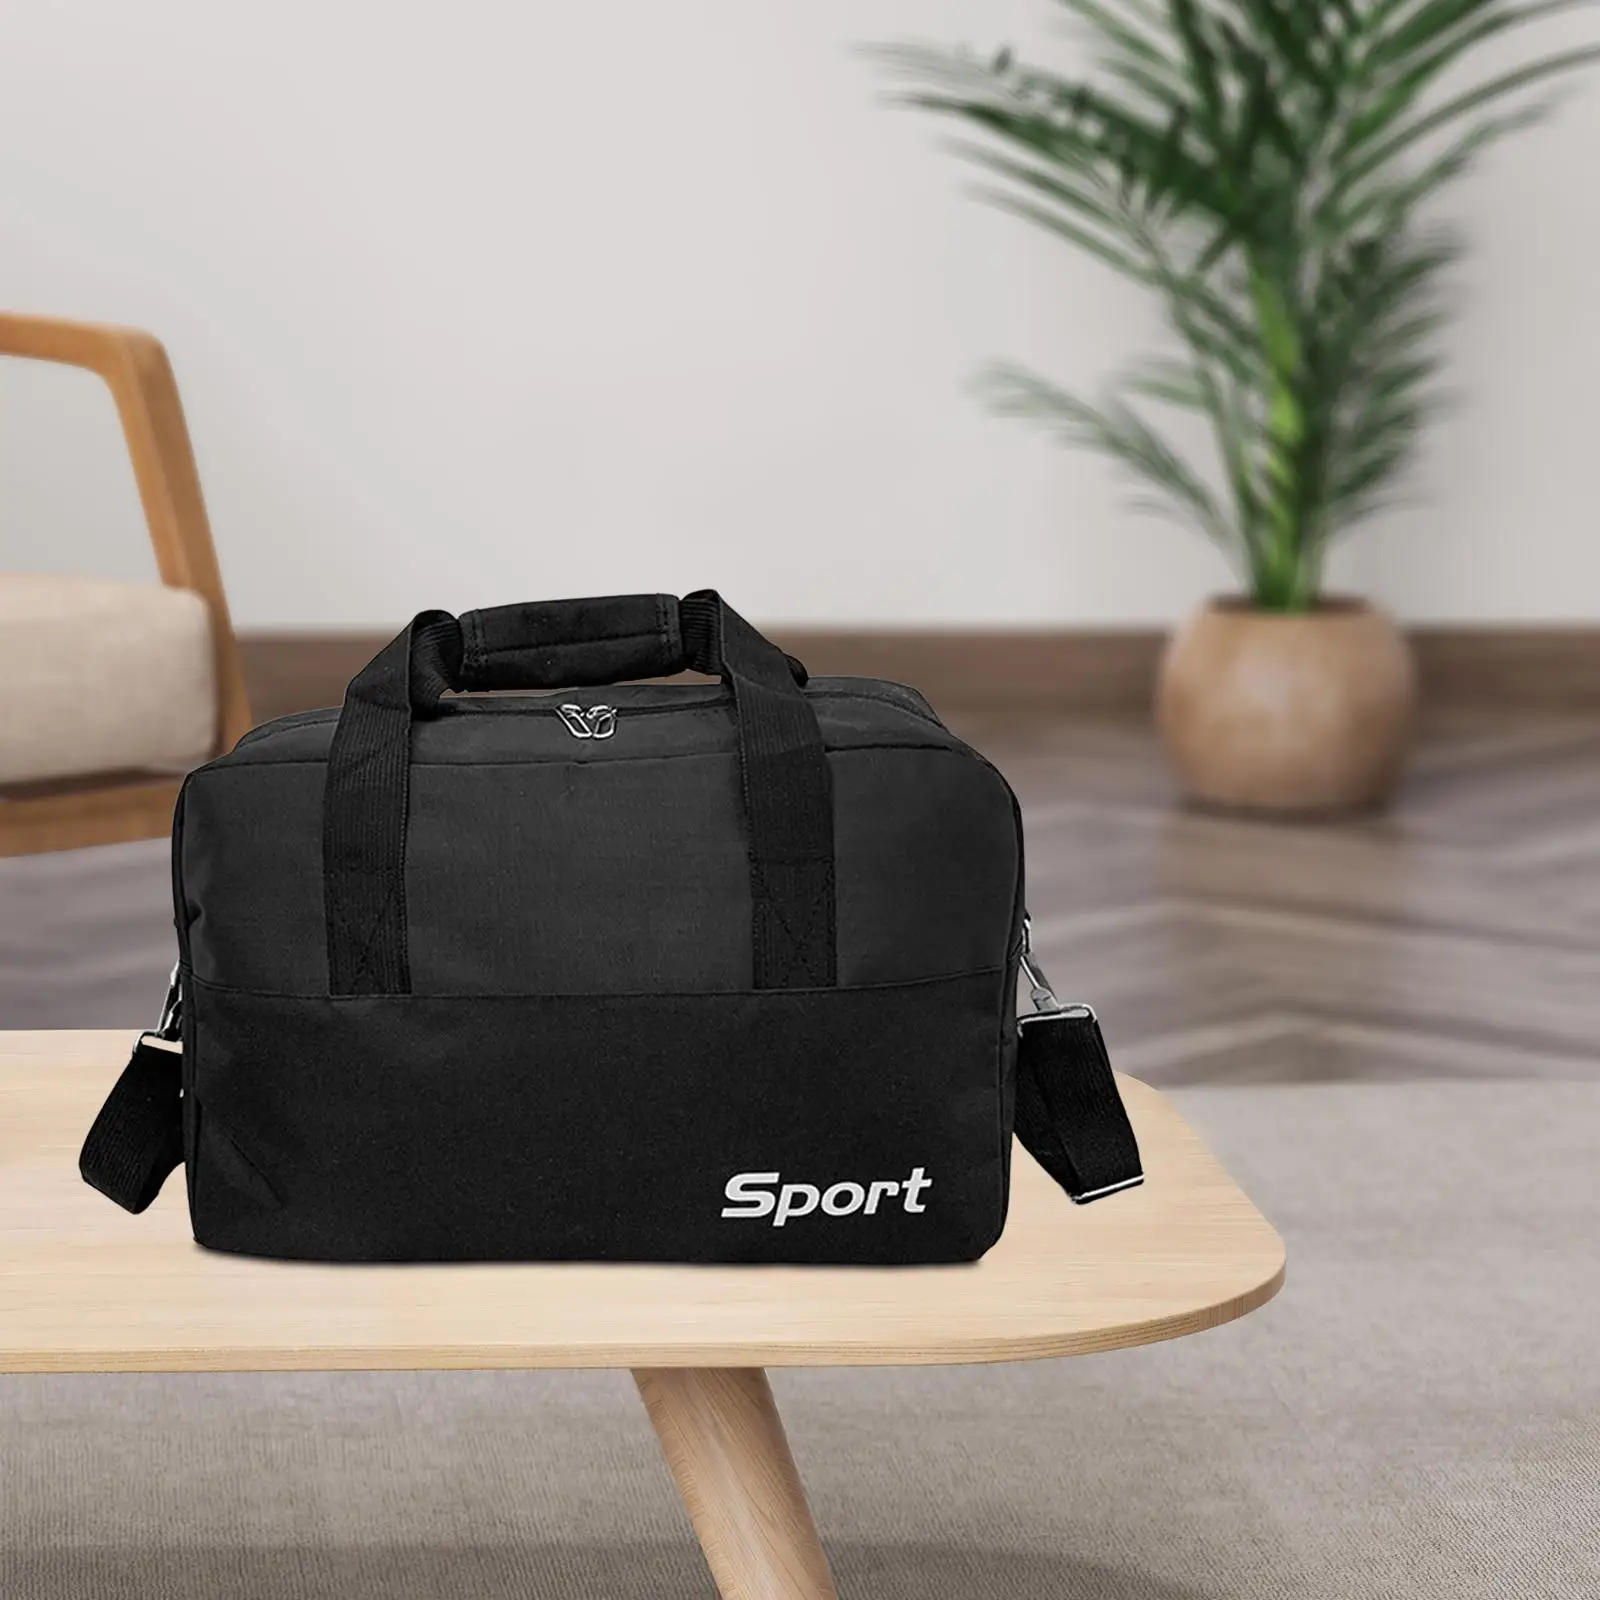 Gym Bag for Women Multifunctional Lightweight Travel Duffle Bag Overnight Weekender Bag for Swimming Beach Sports Workout Gym